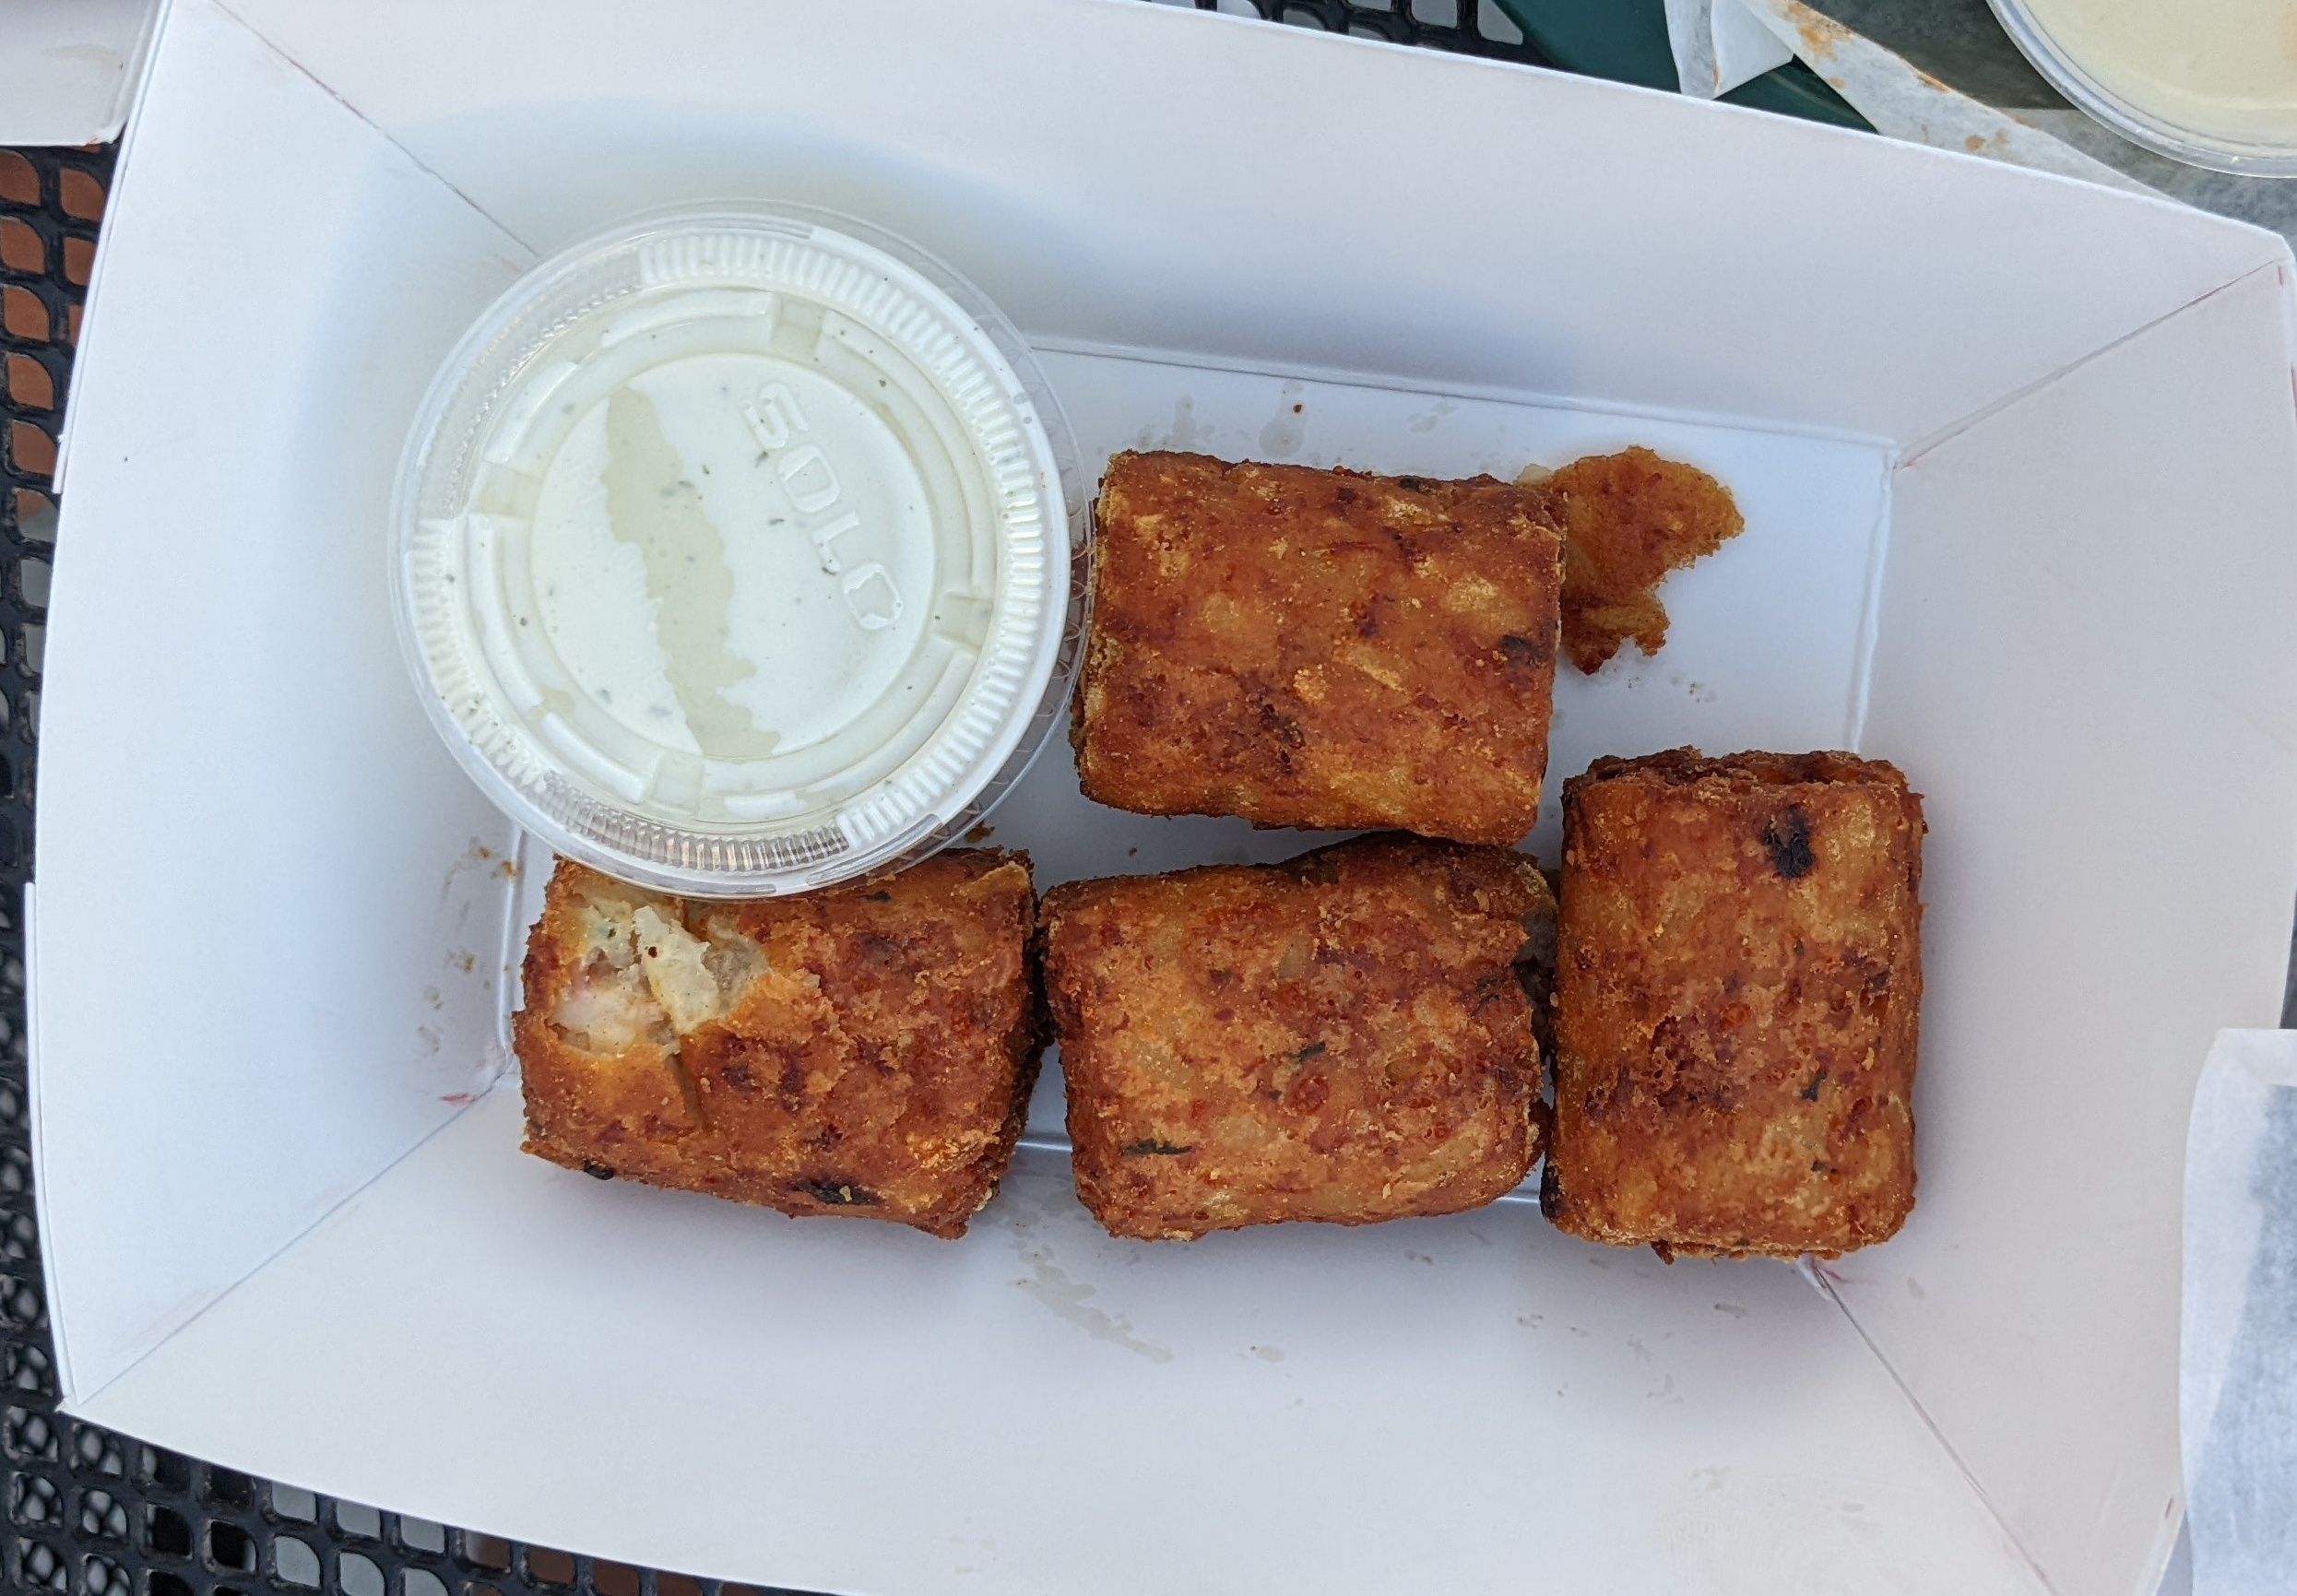 In a white paper basket, there are four giant tots with a cup of sauce. Photo by Tayler Neumann.